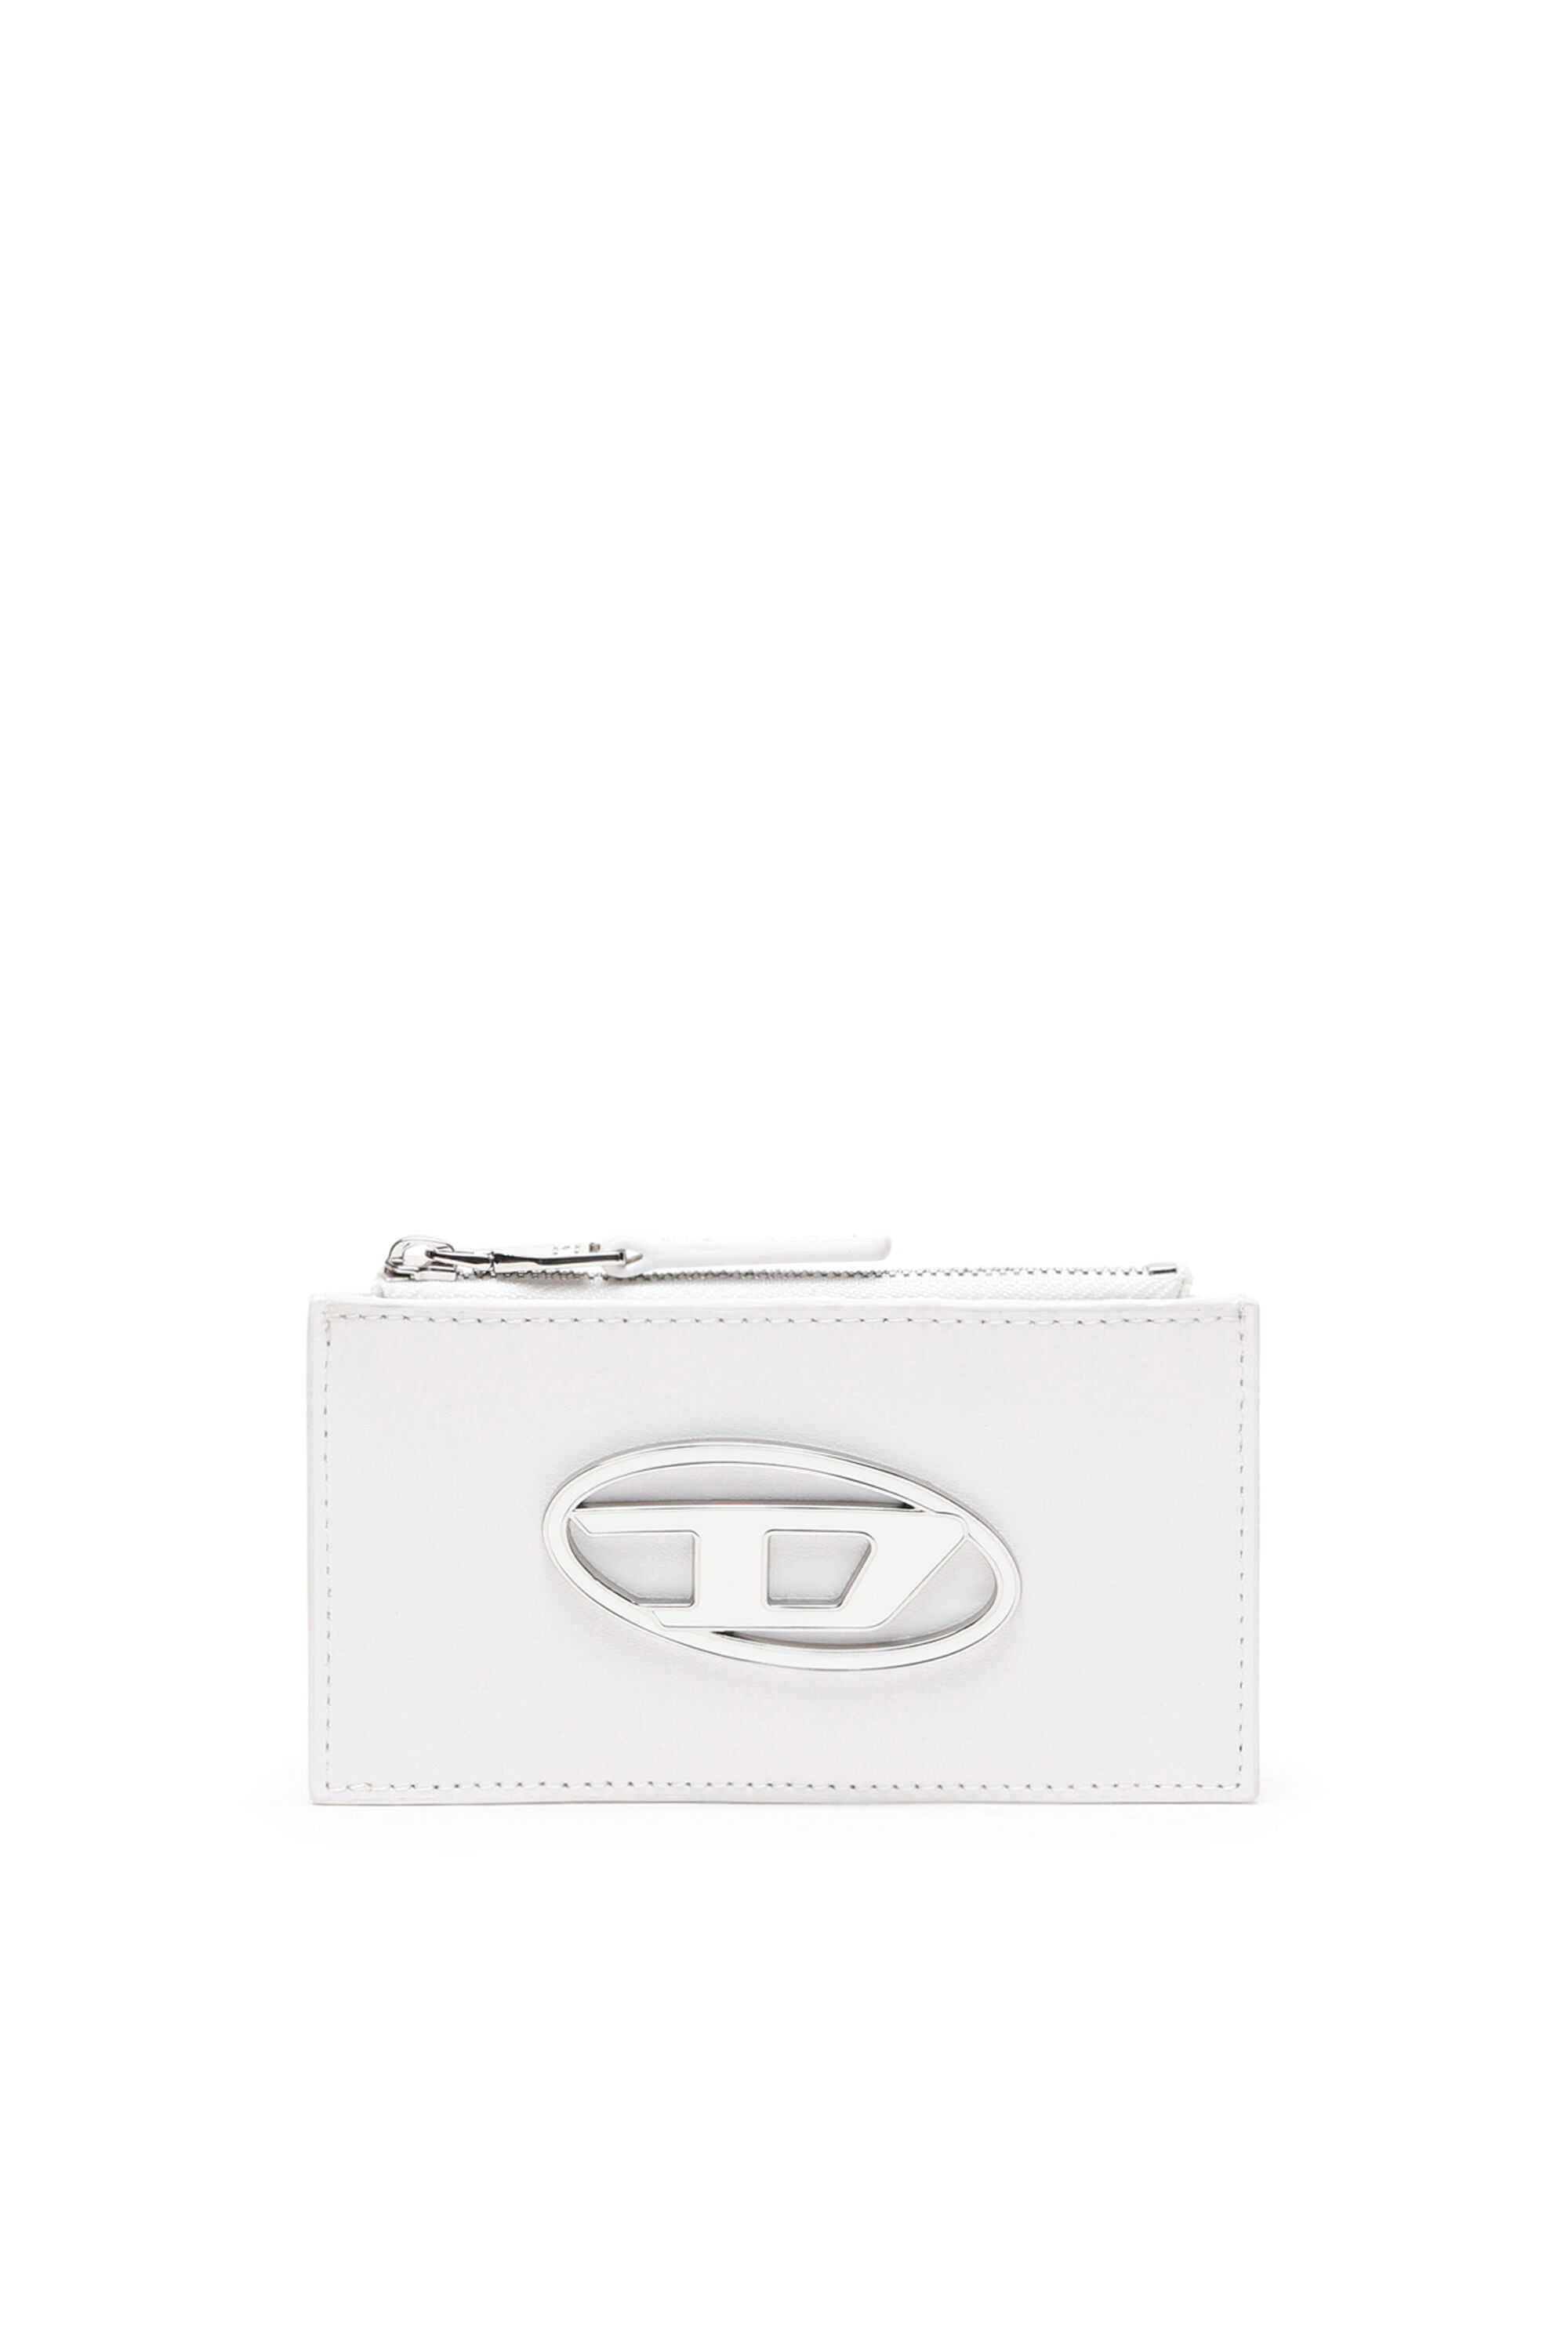 Diesel - PAOULINA, Blanc - Image 1